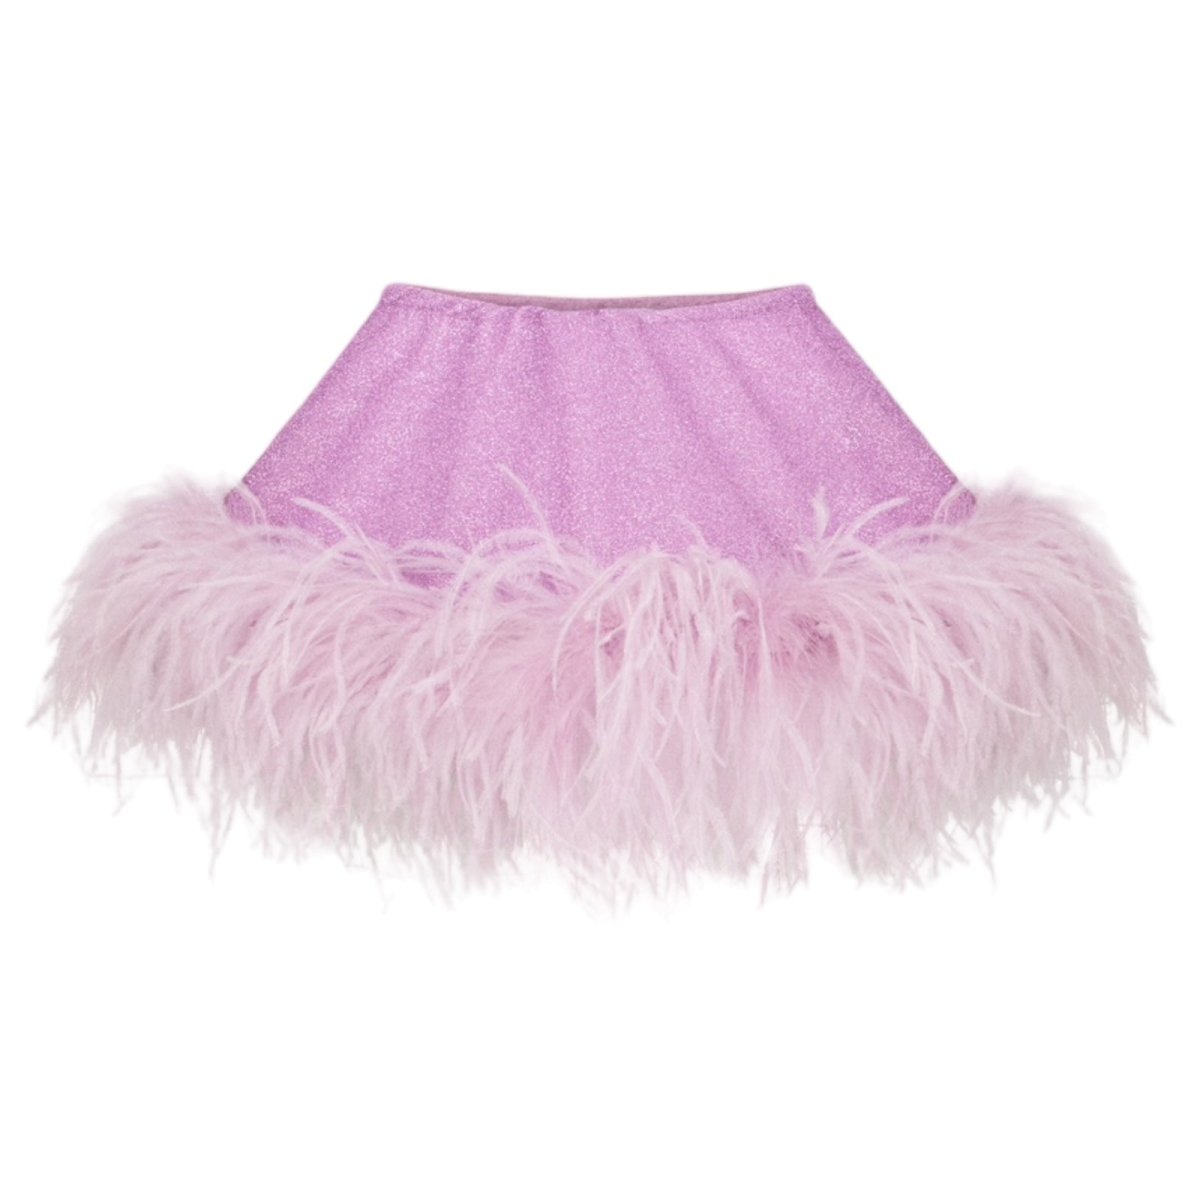 LUMIERE PLUMAGE FEATHER SKIRT (PREORDER) - OSÉREE